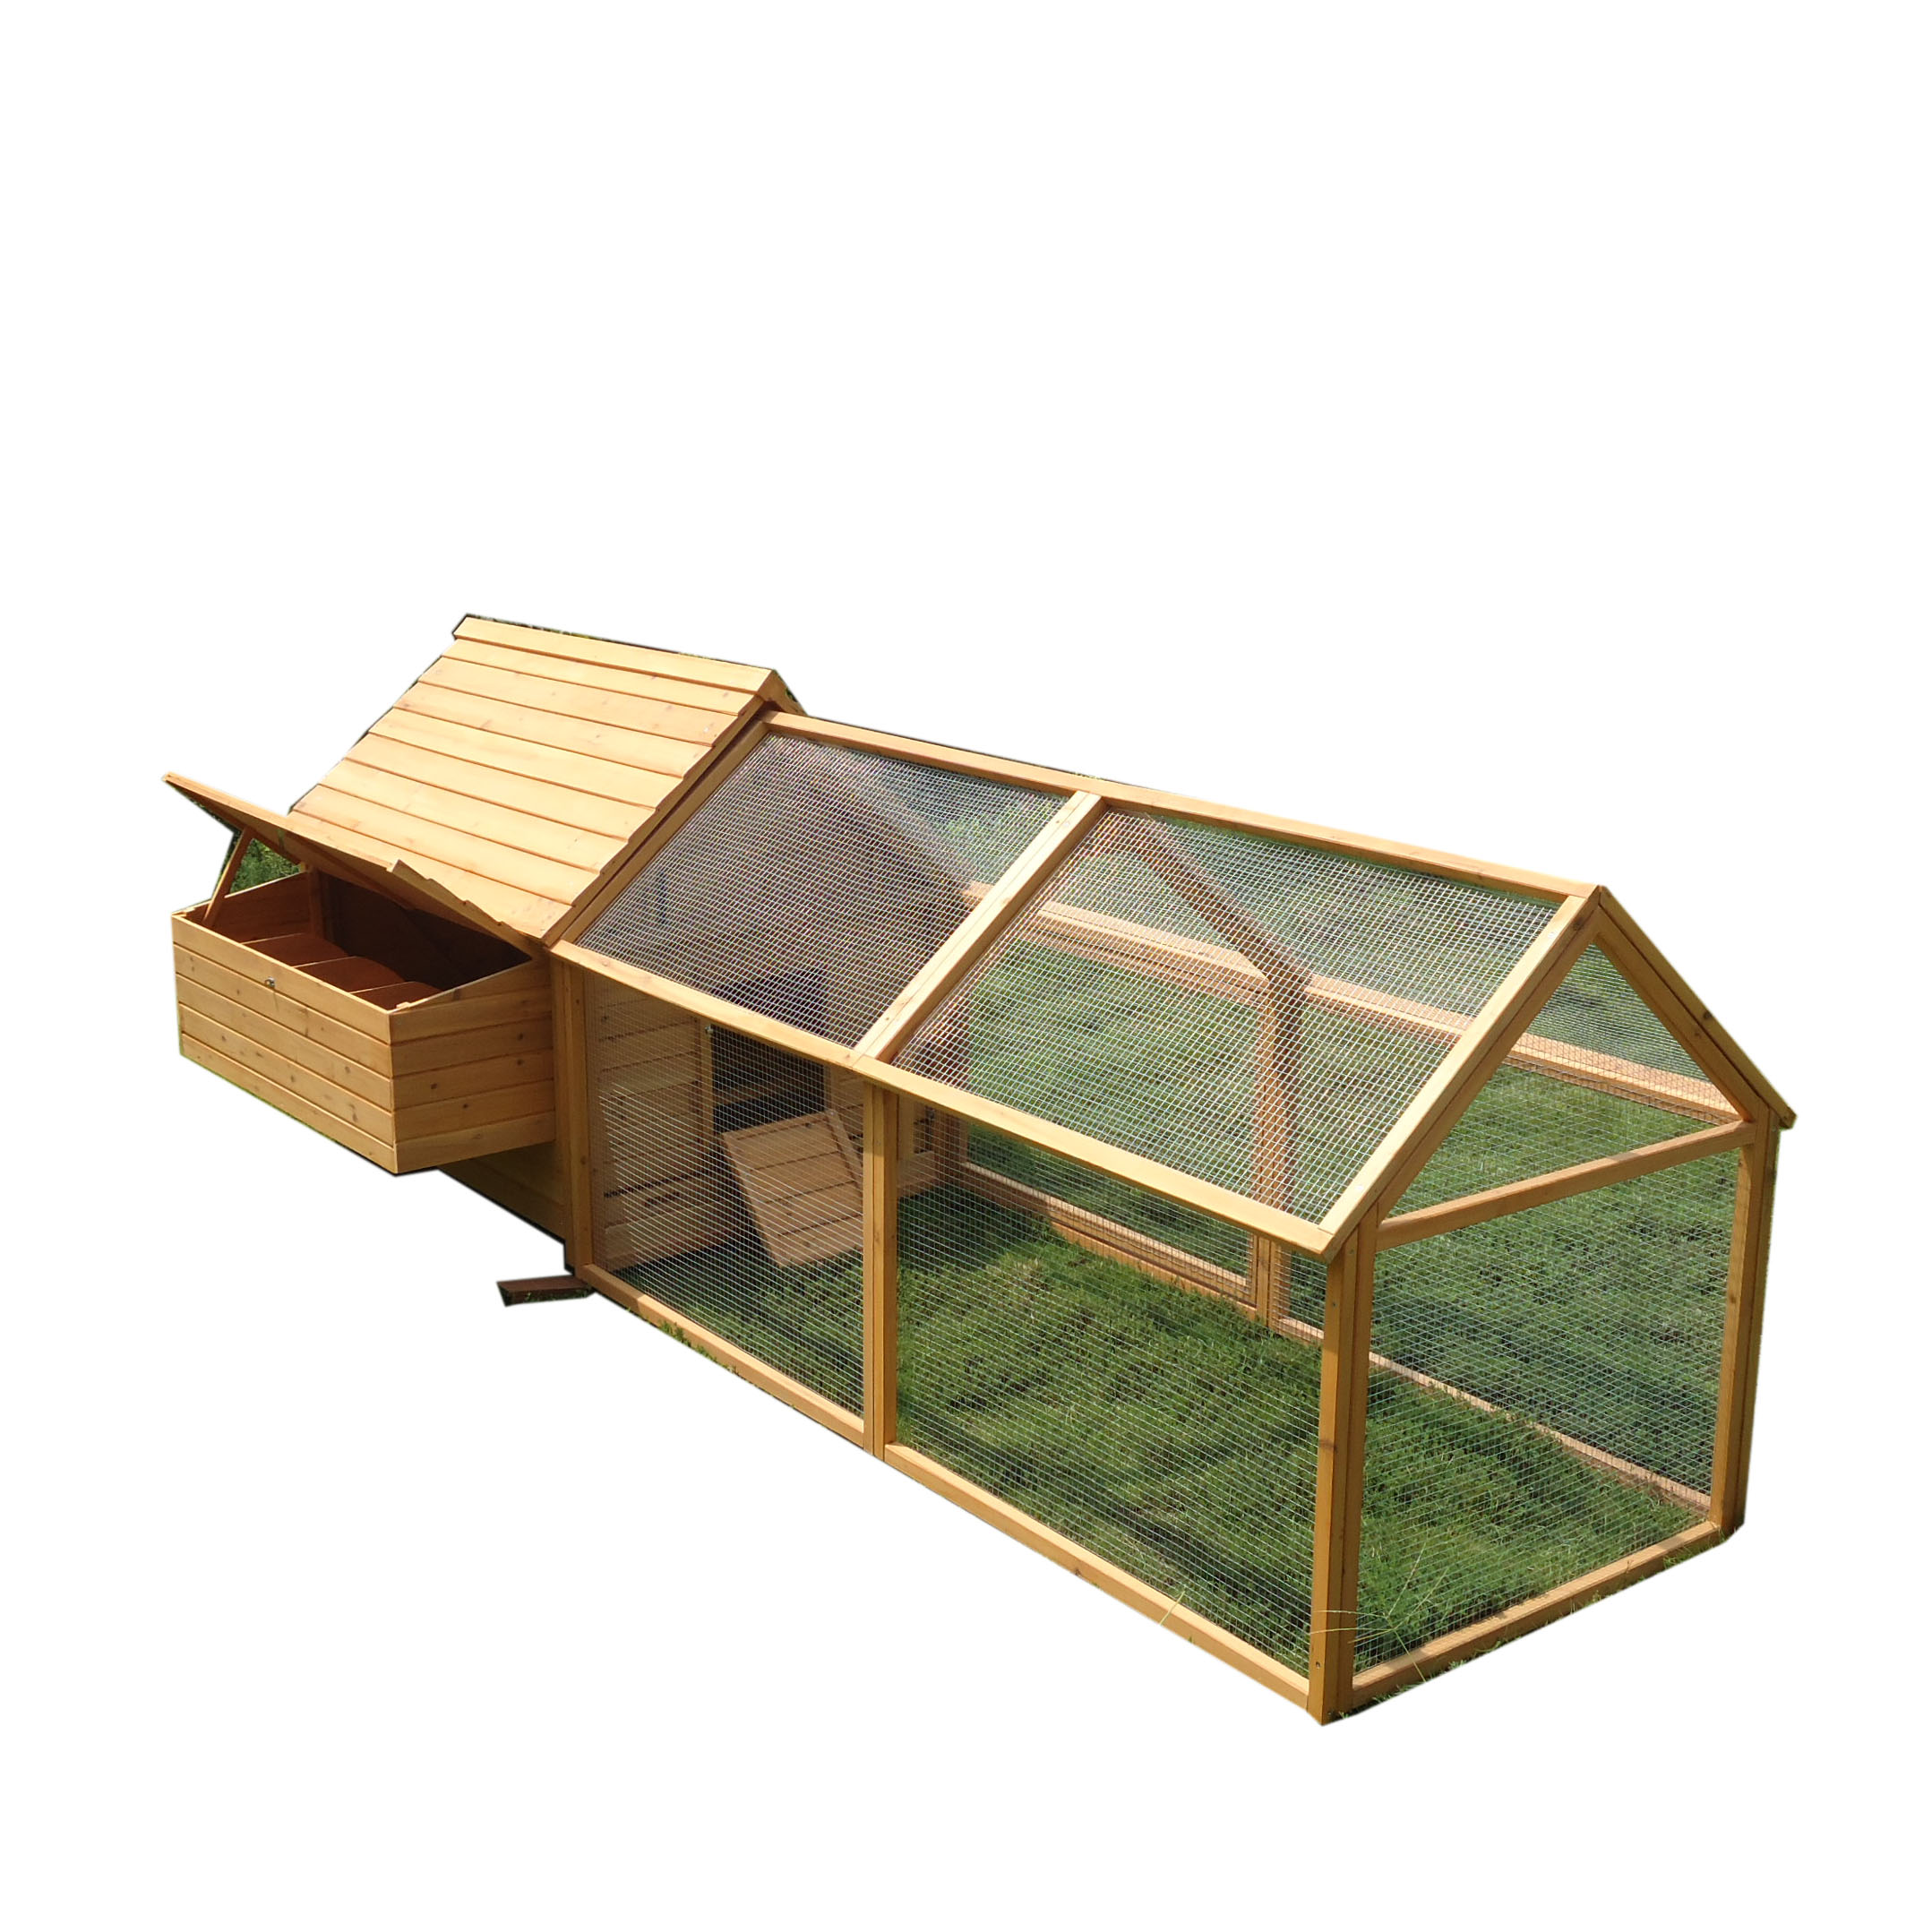 Fir Wooden Waterproof Roof large run hen house Chicken Coop egg layer Poultry cage for Sale